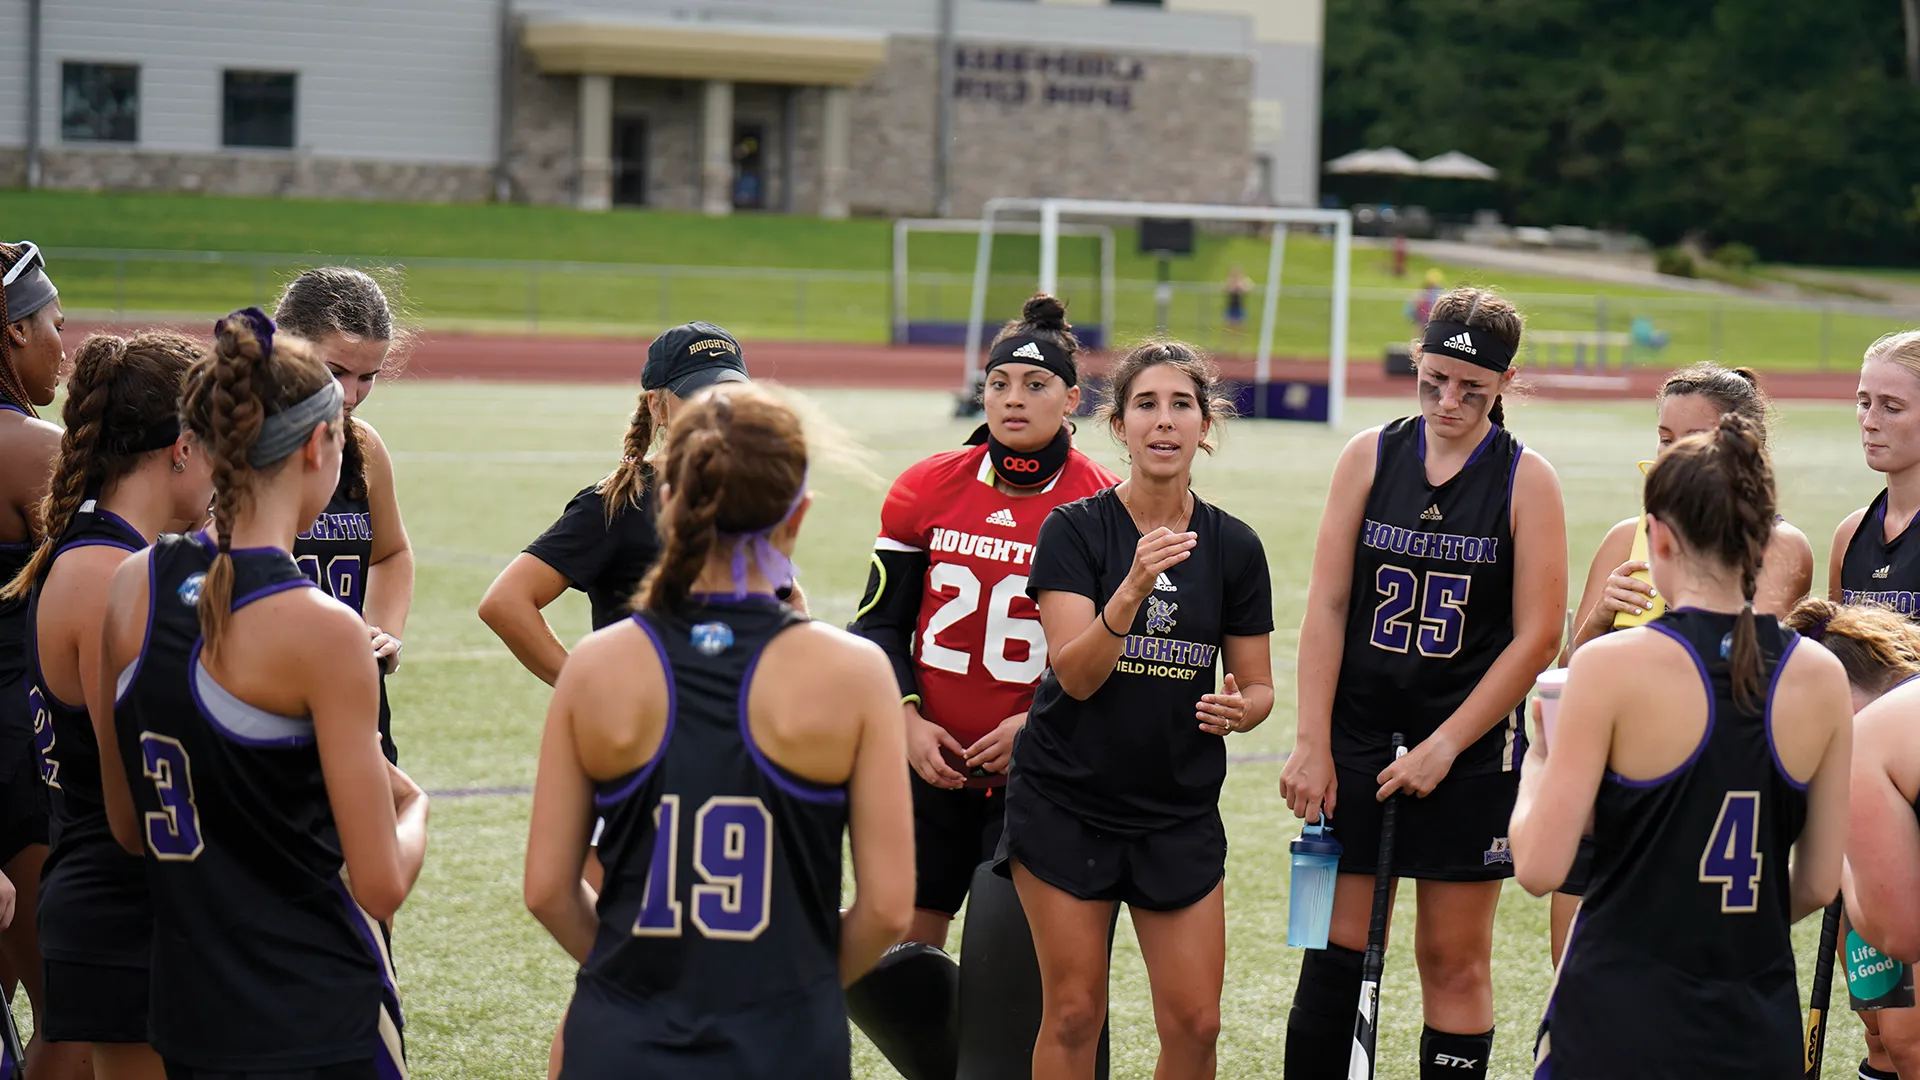 Houghton athletic coach Hannah Ogden coaching the field with the field hockey team.